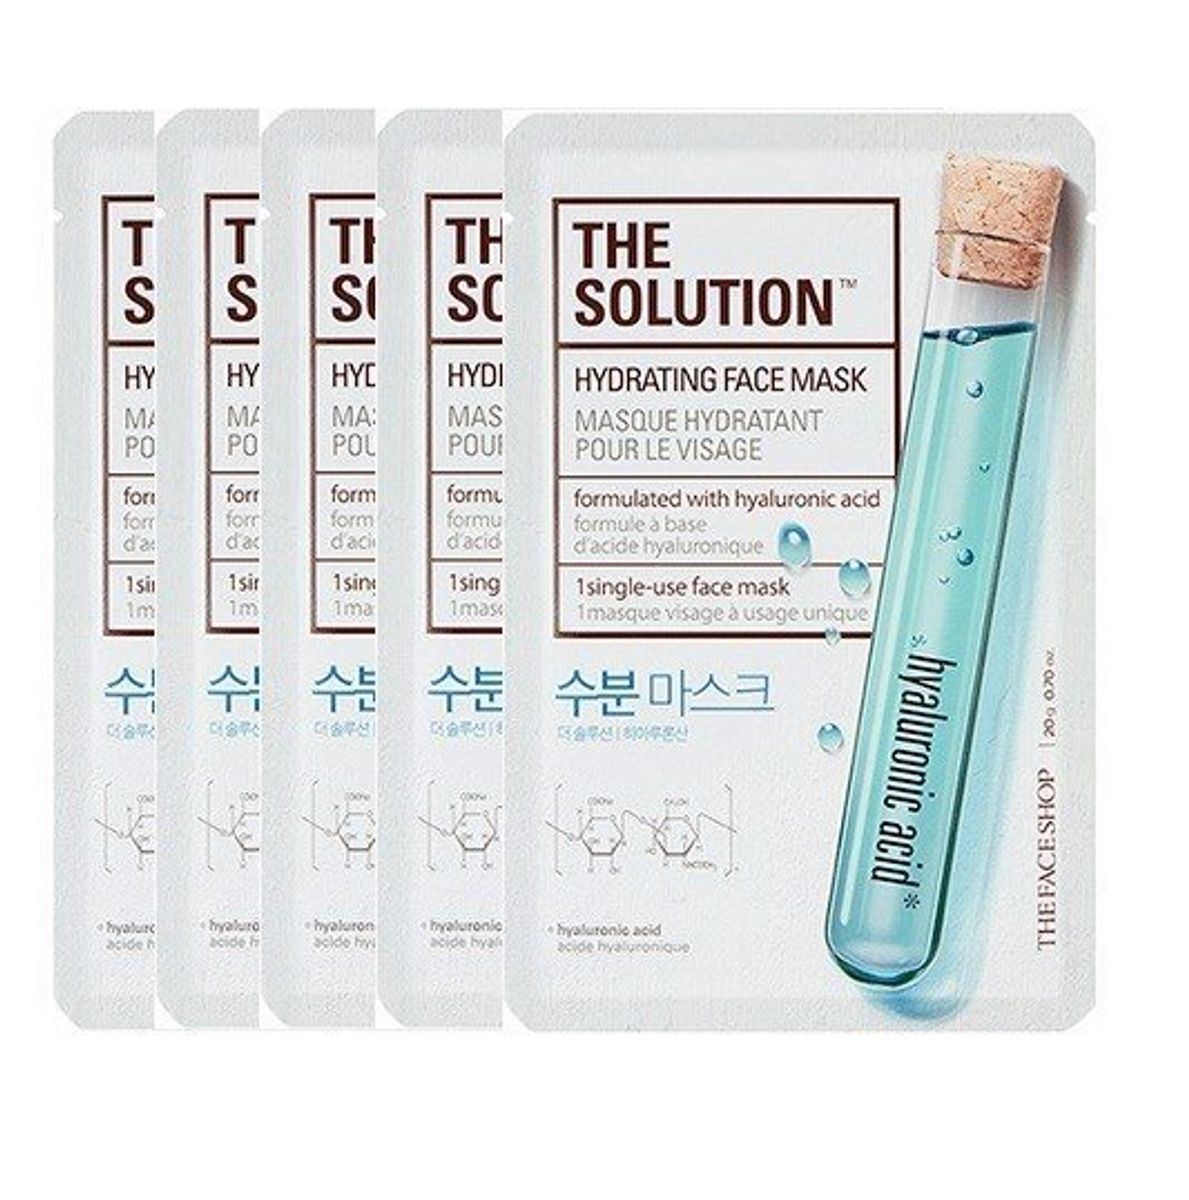 set-10-the-solution-hydrating-face-mask-1